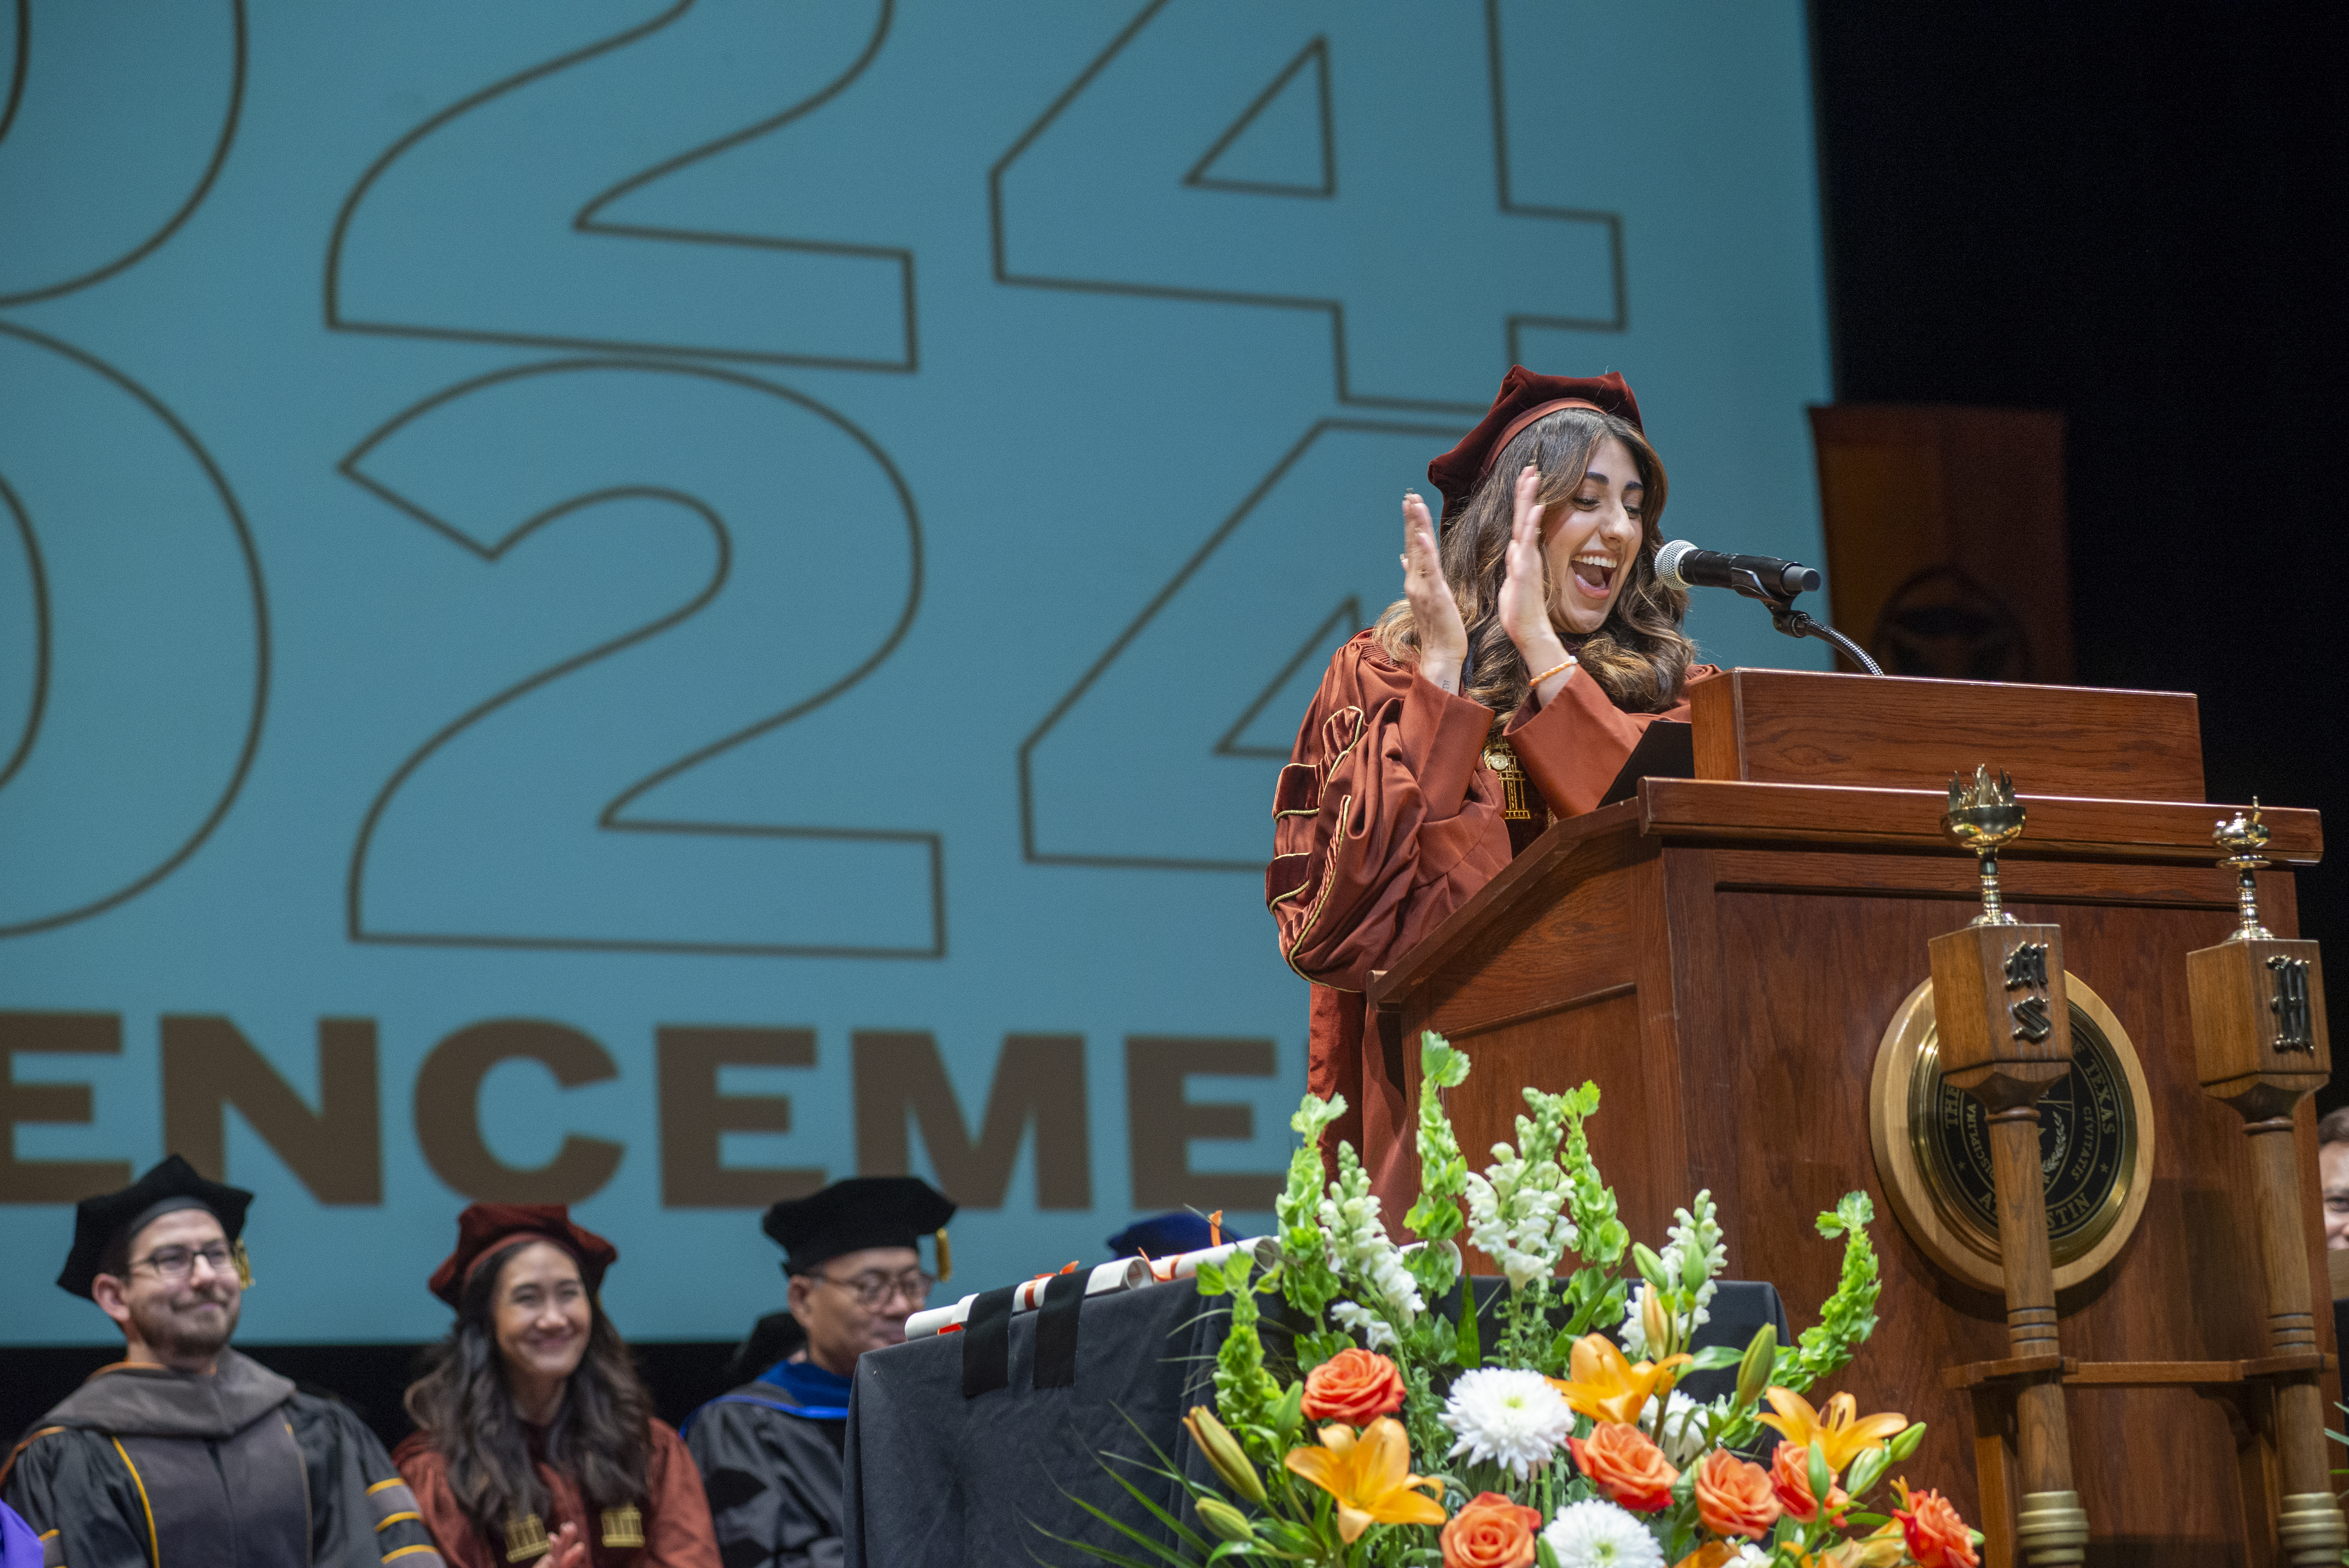 A woman wearing regalia and clapping while giving a speech in front of a podium.